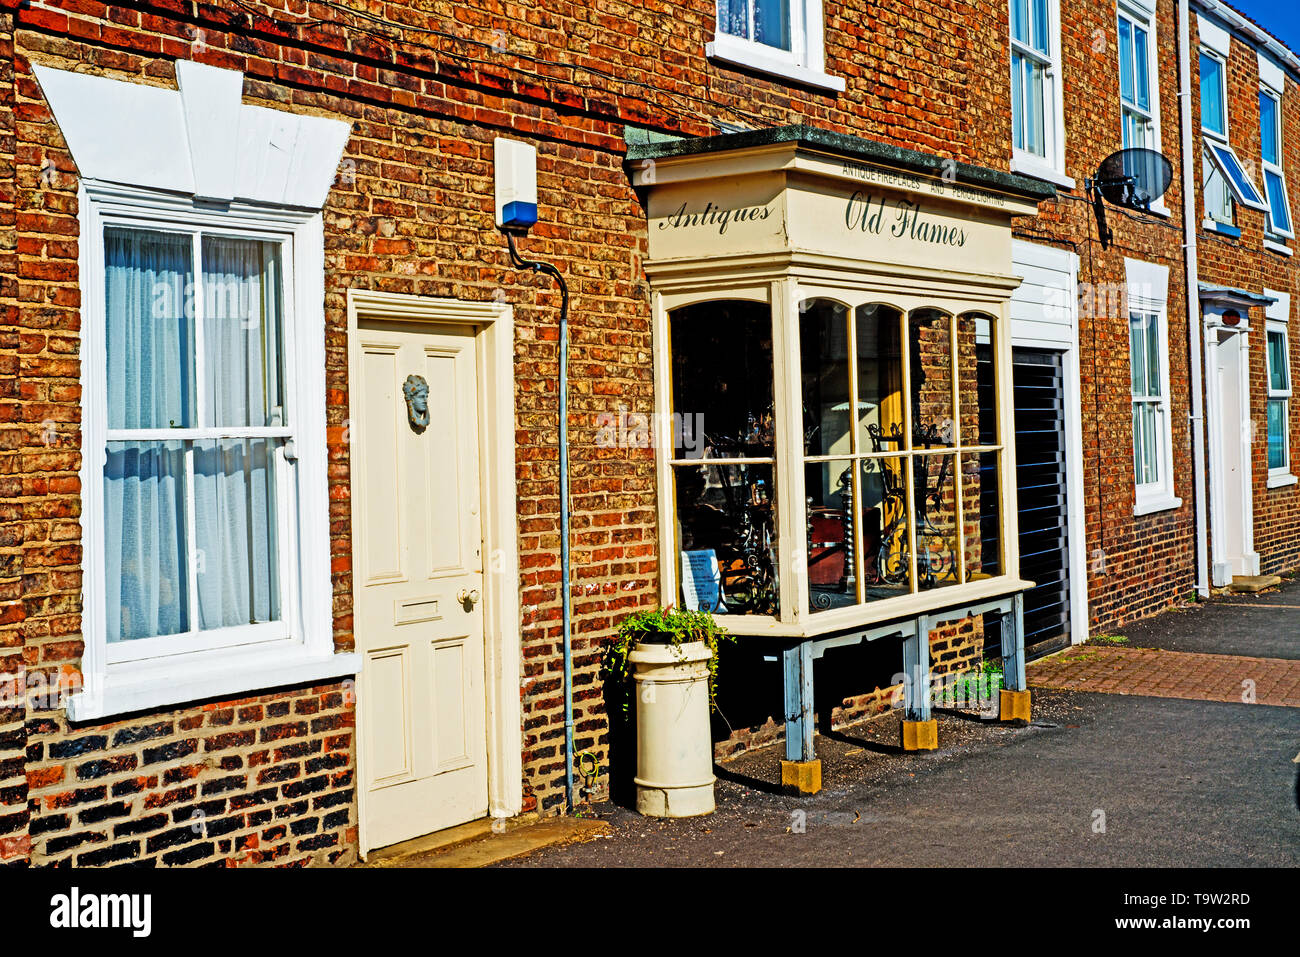 Old Flames Antique Shop, Easingwold, North Yorkshire, England Stock Photo